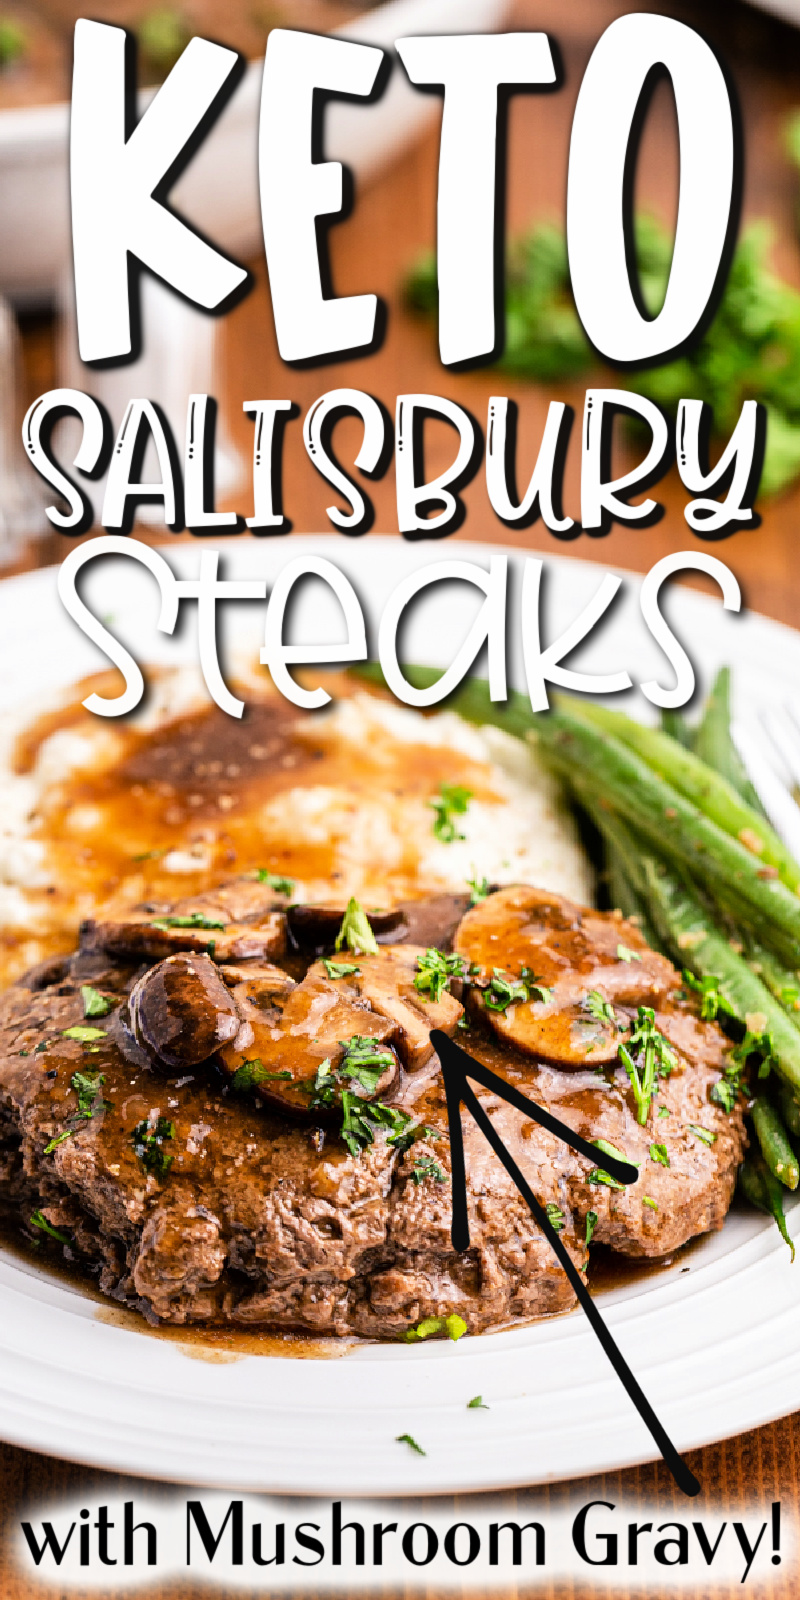 Keto Salisbury Steaks with Mushroom Gravy - This Salisbury Steak recipe is a keto version of that classic diner favorite kicked up a notch with delicious mushroom gravy on top. The meat is juicy and tender and the gravy is so good you will never know this is low carb! #keto #lowcarb #glutenfree #beef #steaks #salisbury #mushroom #gravy #recipe